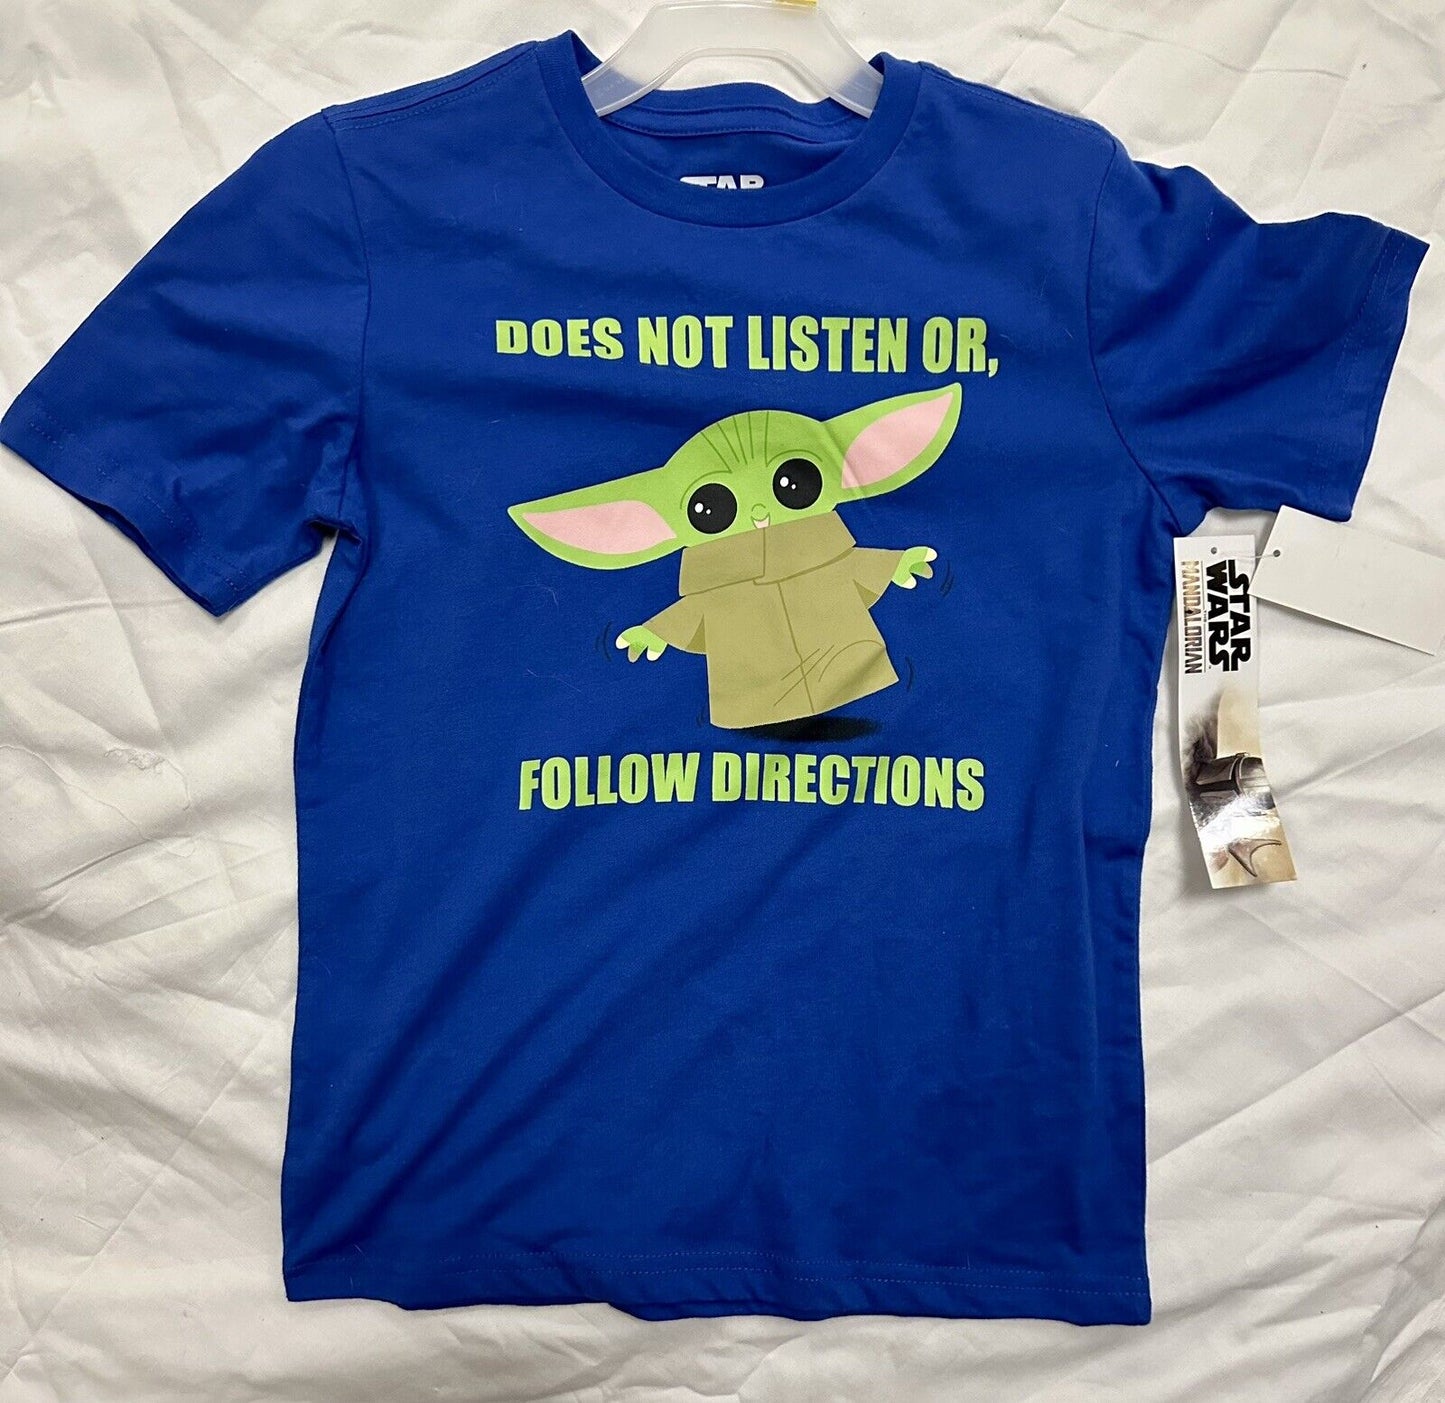 Star Wars Baby Yoda Does Not Listen Or Follow T Shirt Graphic Tee Size M 8